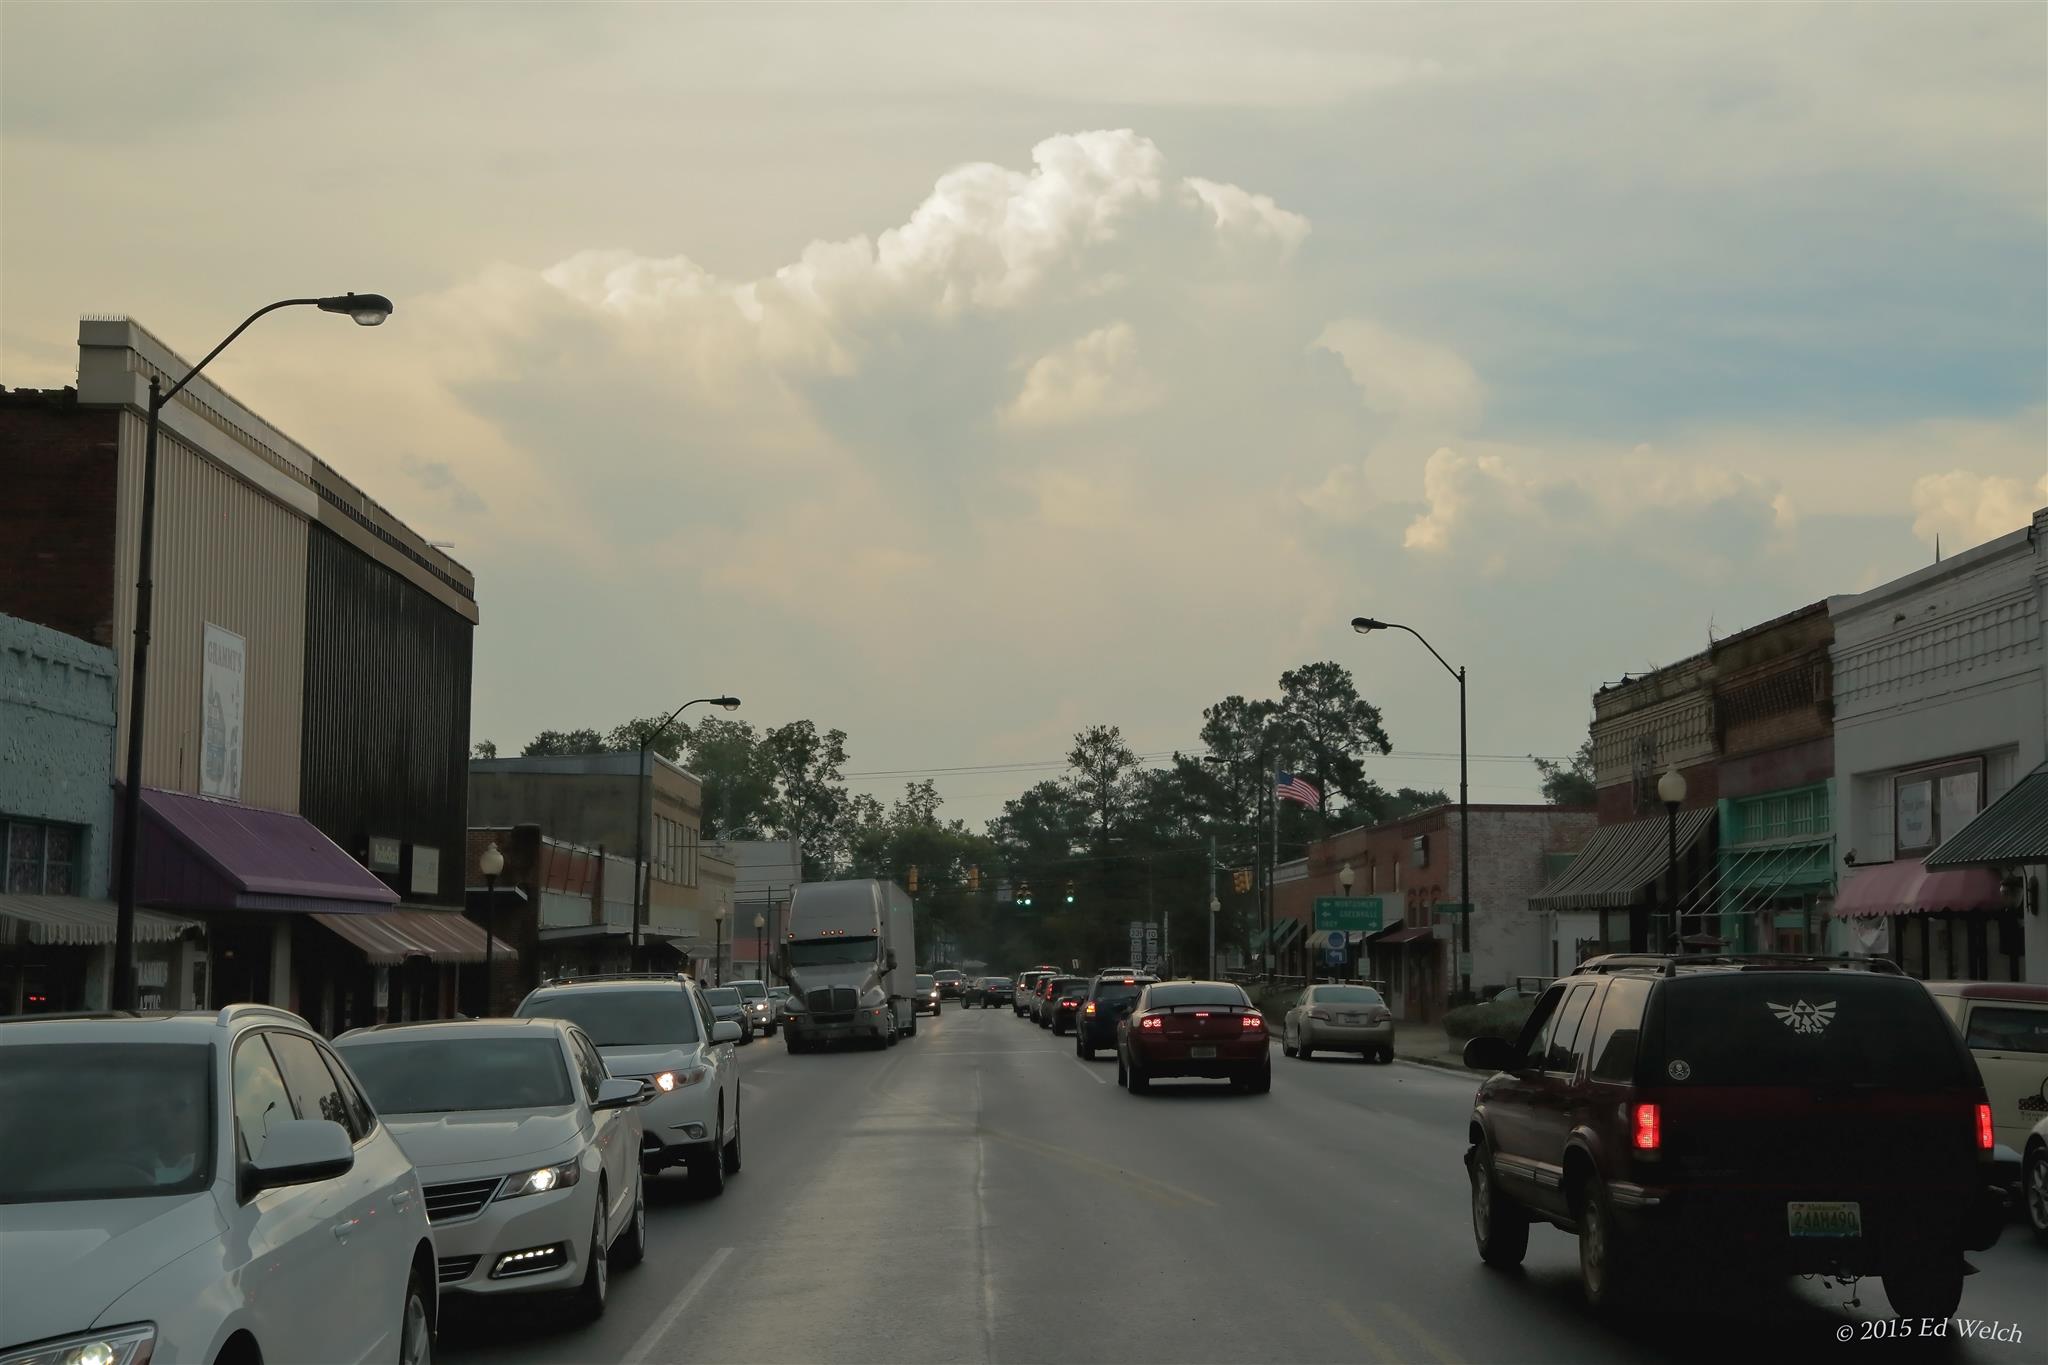 August 7, 2015 - Downtown after a storm.